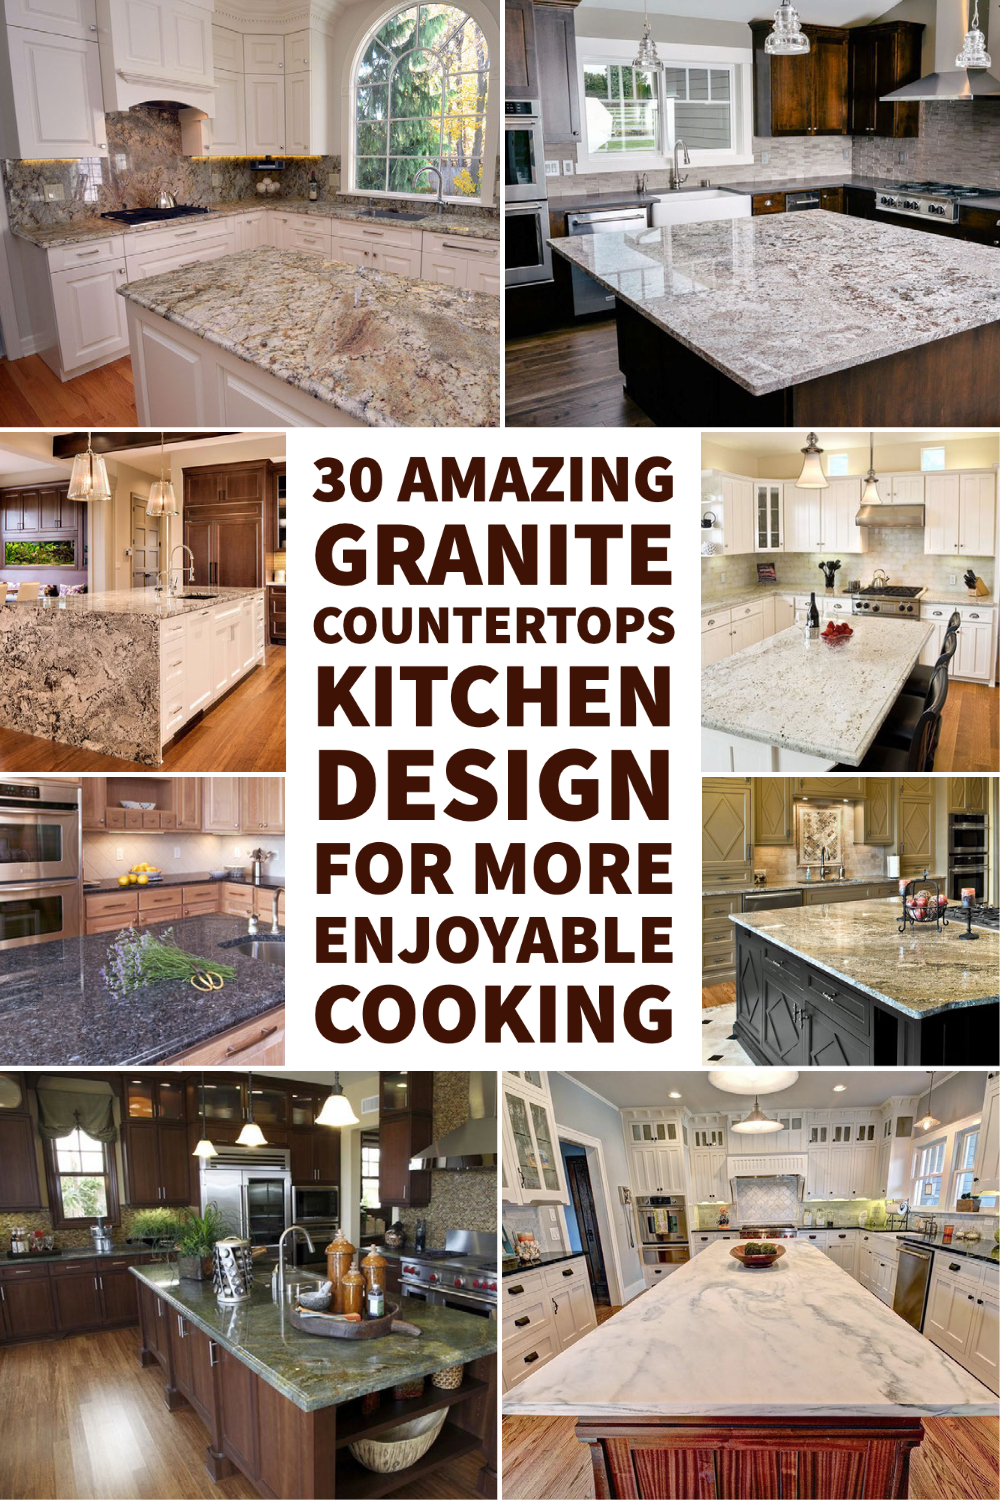 30 Amazing Granite Countertops Kitchen Design For More Enjoyable Cooking